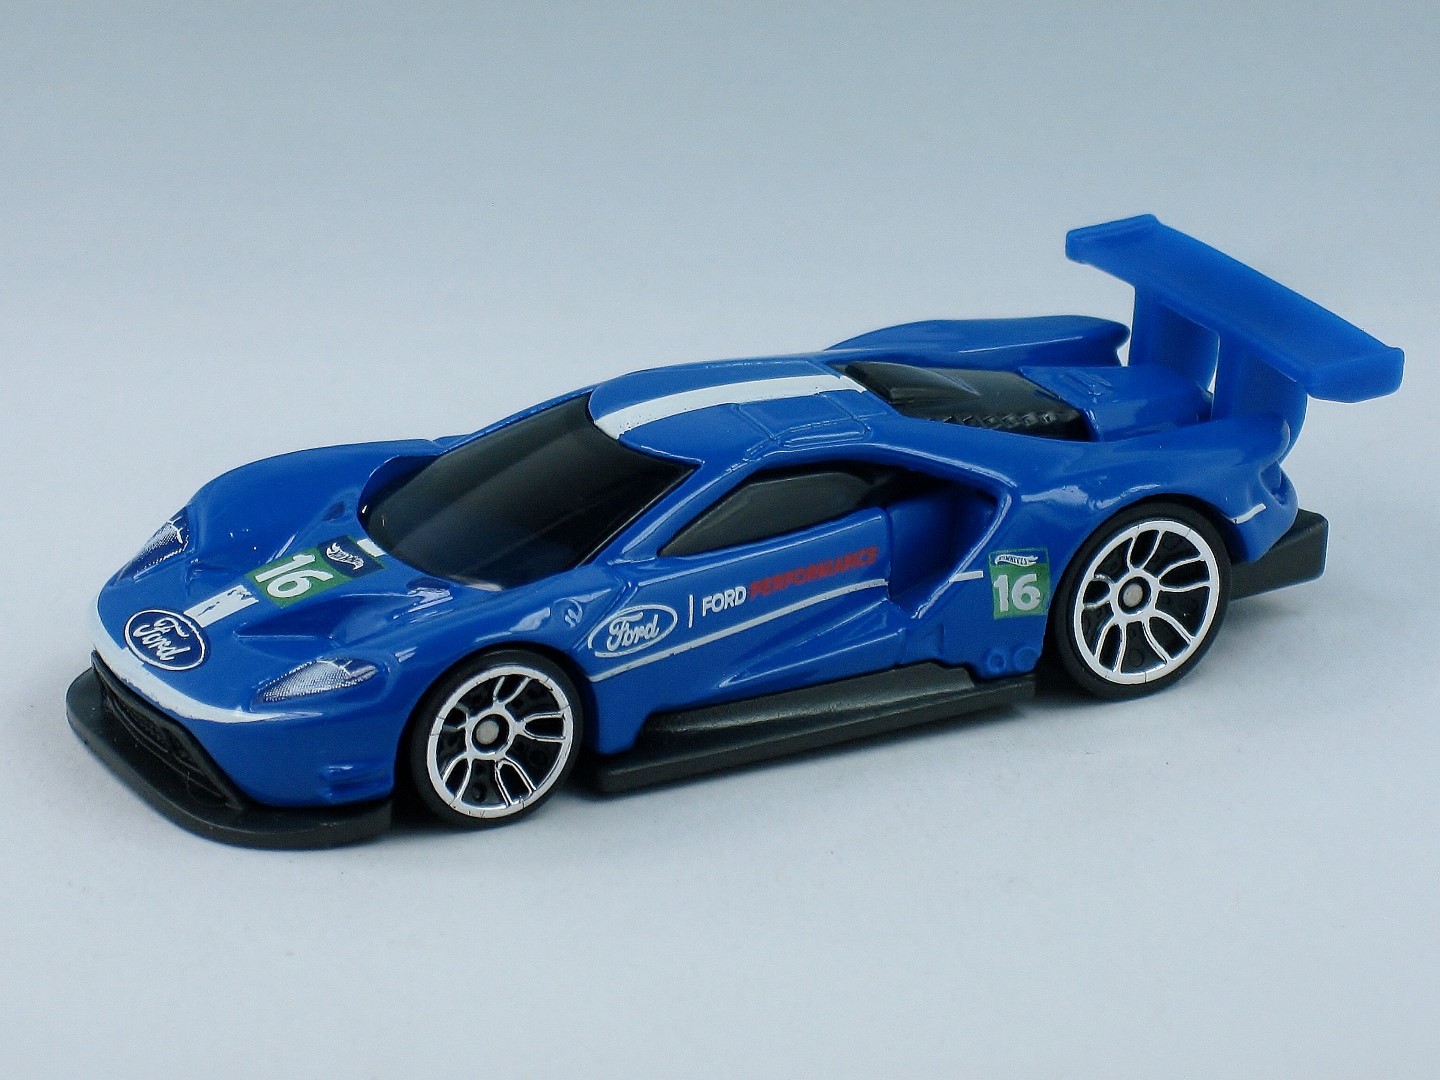 Premium HW Edition Ford GT 1:64 Scale Rare Collectible 